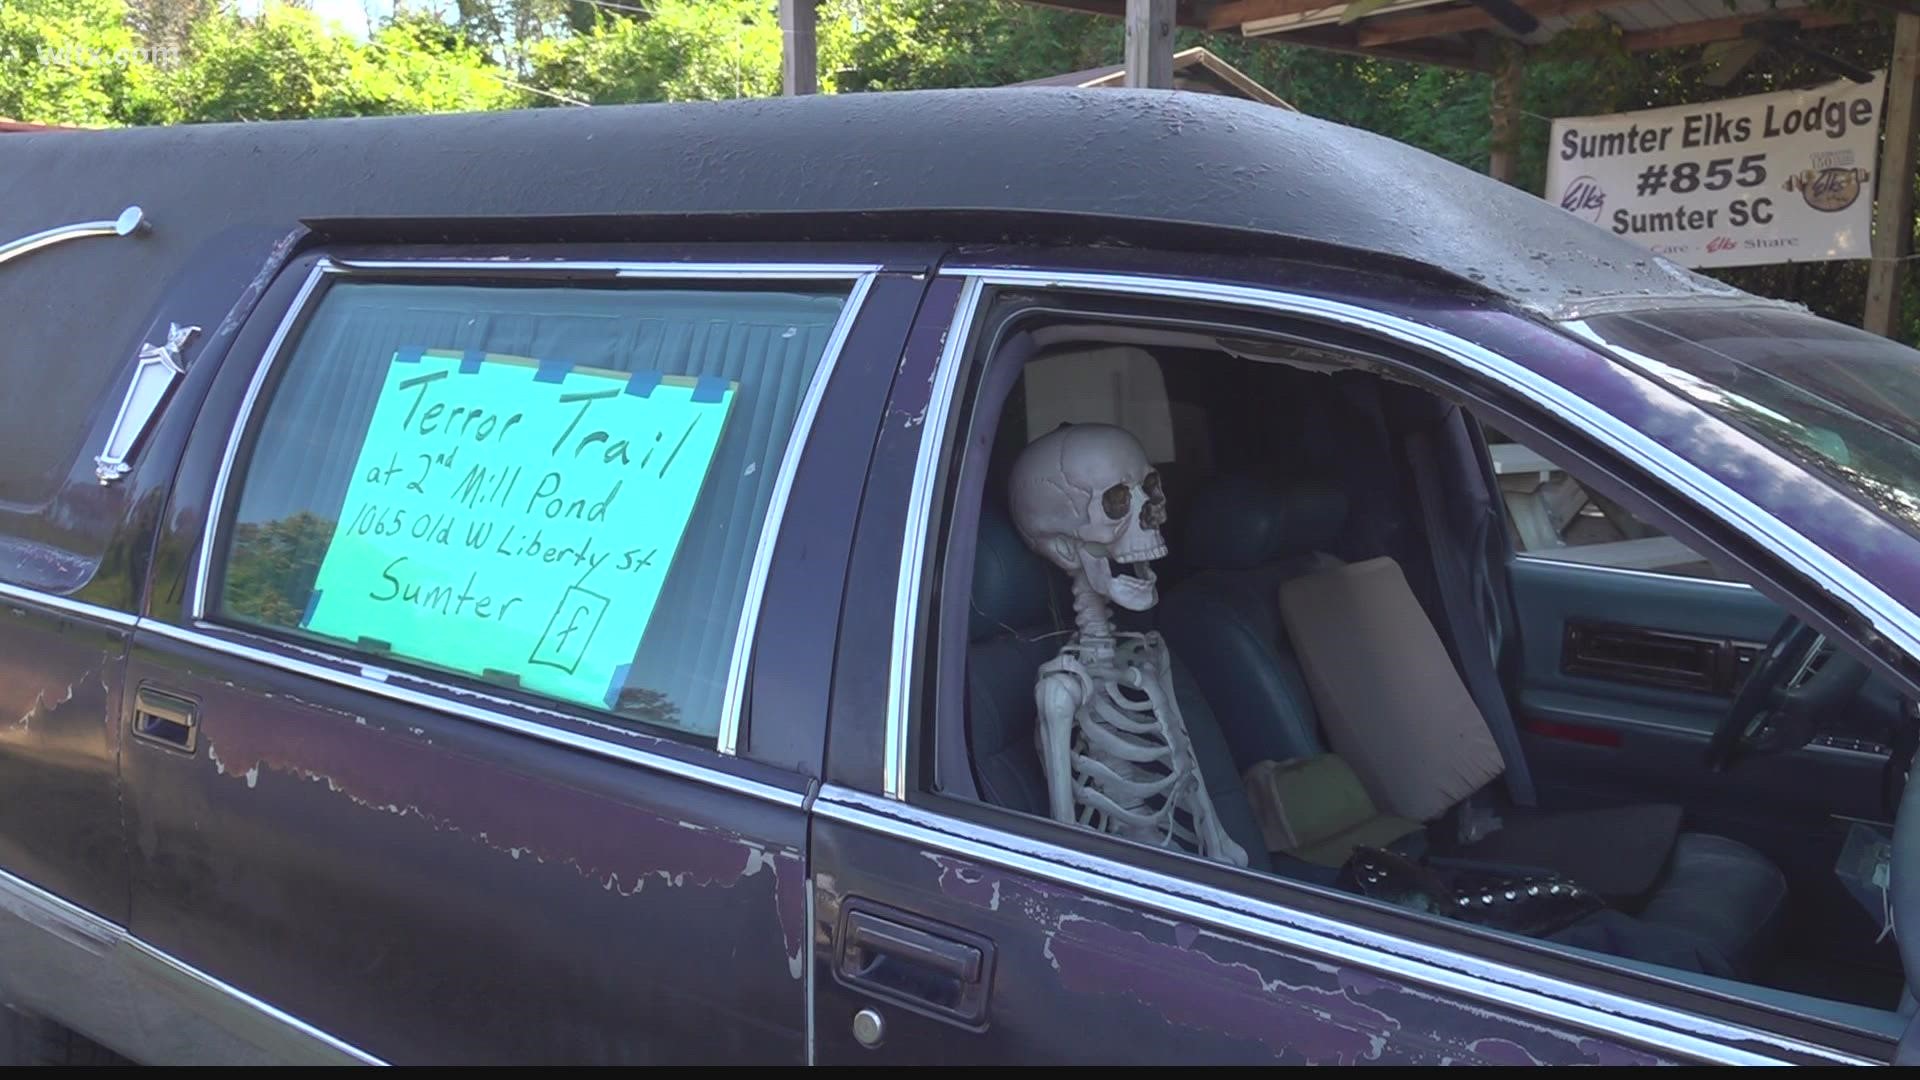 Scaring Sumter residents for a good cause, the group donates all  money to local organizations.